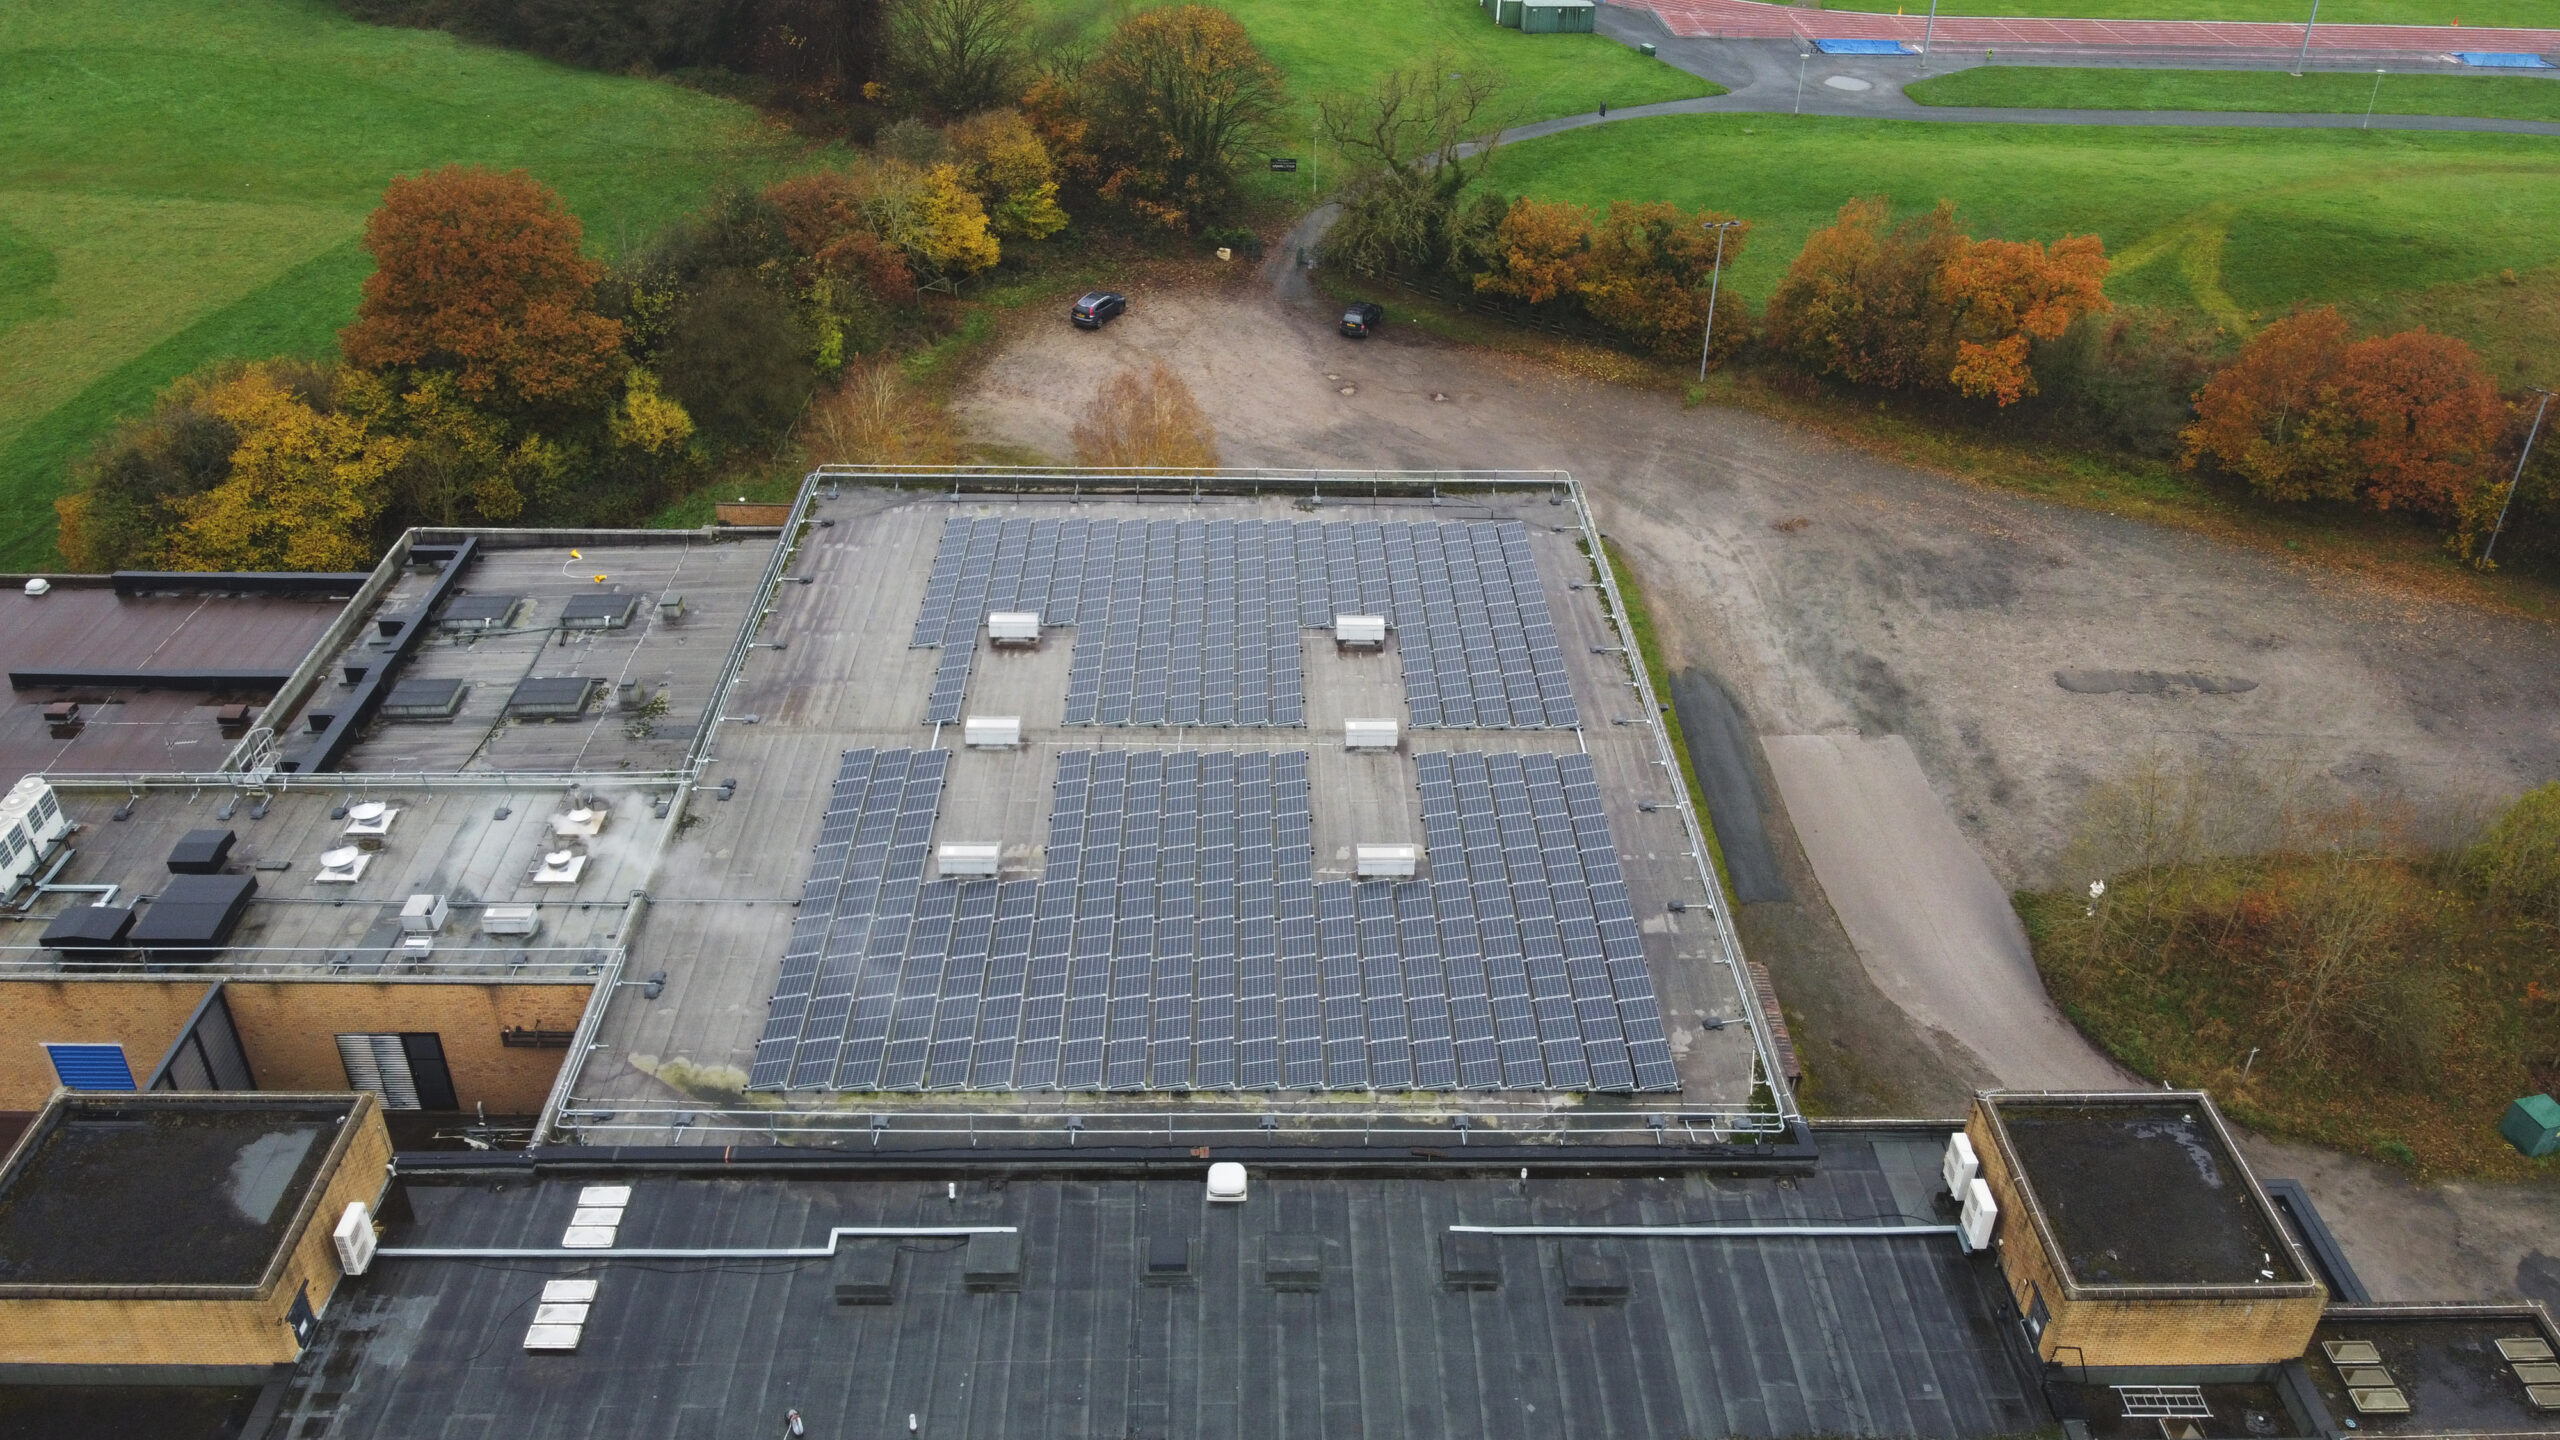 Leisure Centre in Macclesfield Solar Panel System